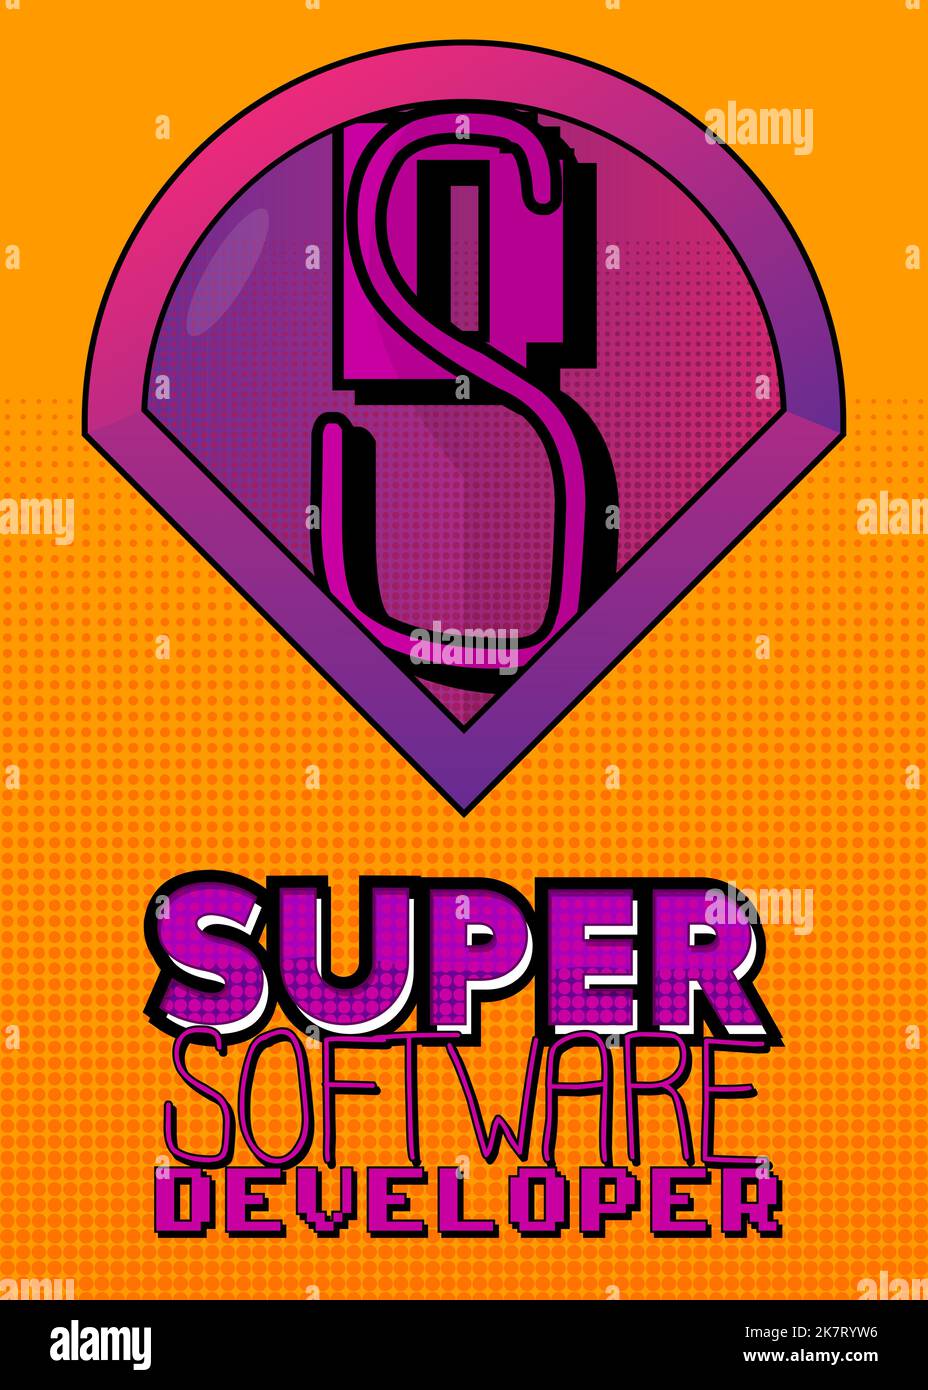 Superhero coat of arms showing Software Developer icon. Colorful comic book style vector illustration. Stock Vector